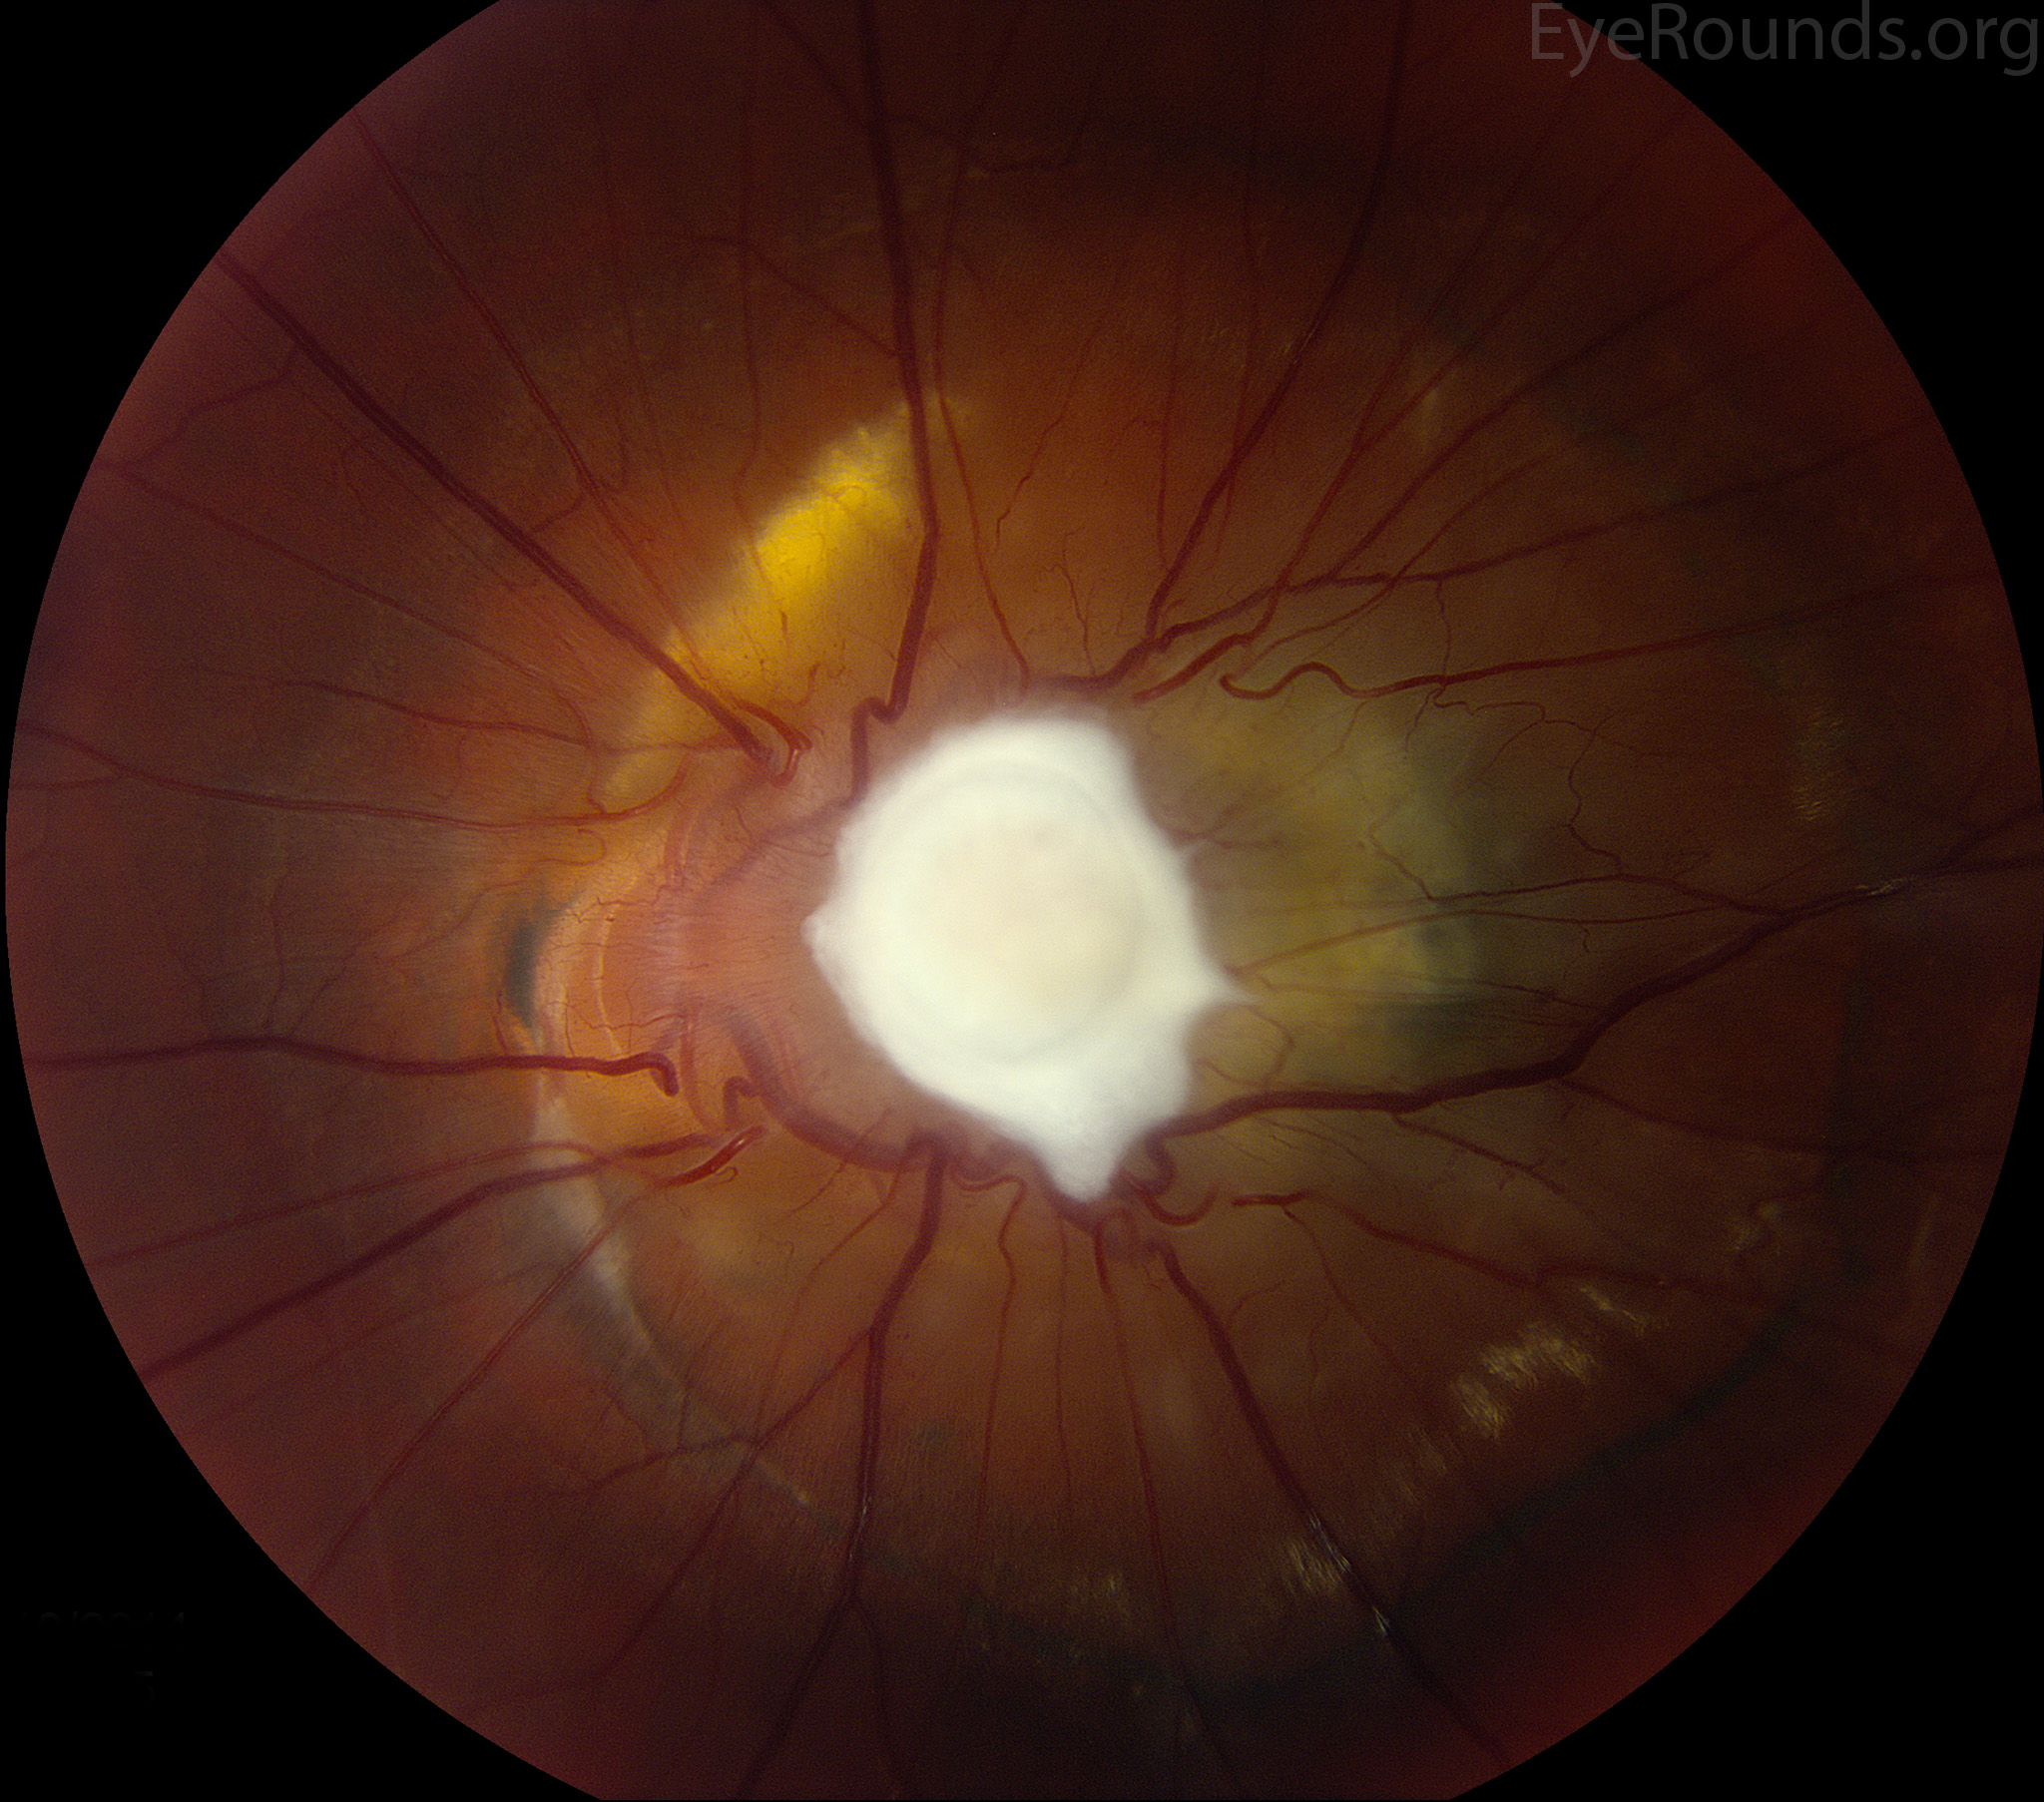 localized granuloma located over the optic nerve